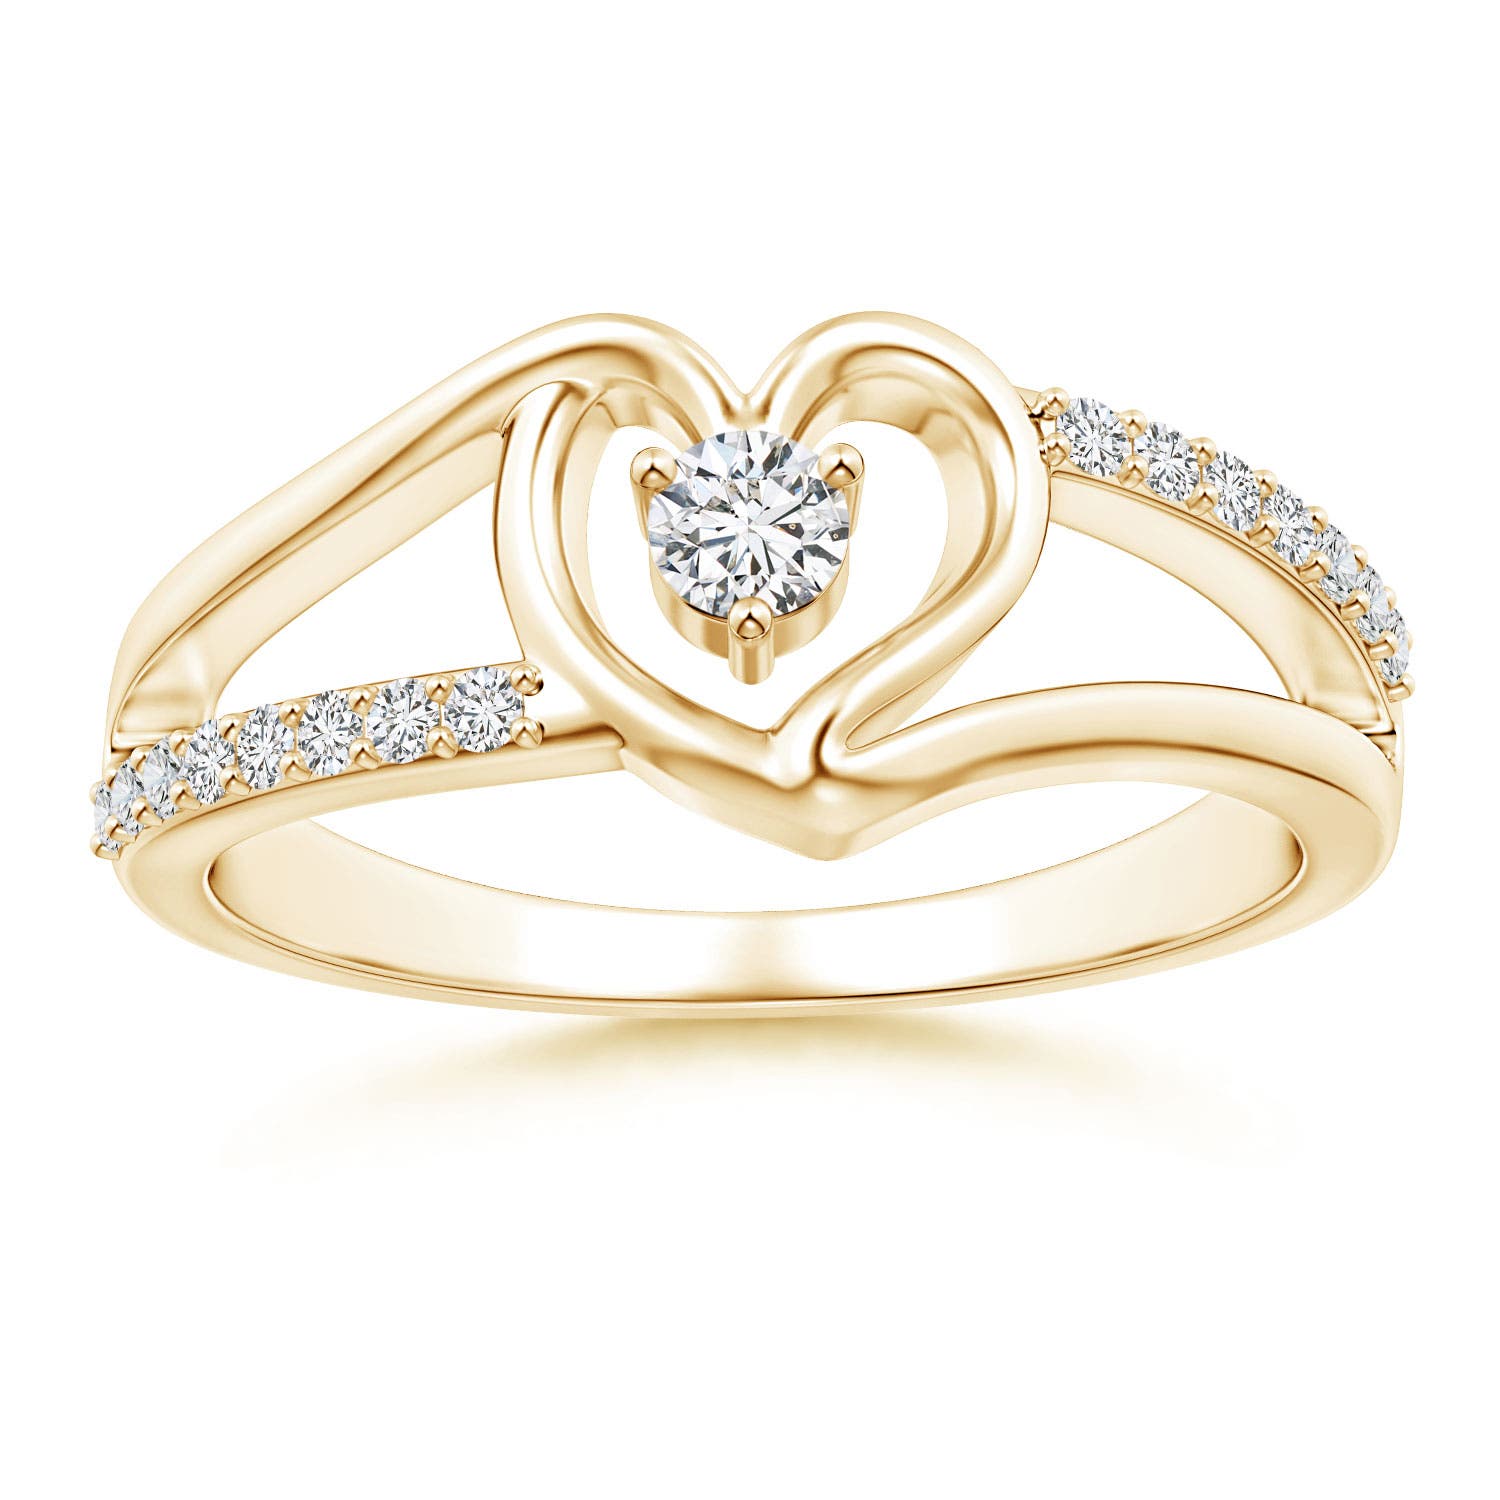 H, SI2 / 0.26 CT / 14 KT Yellow Gold